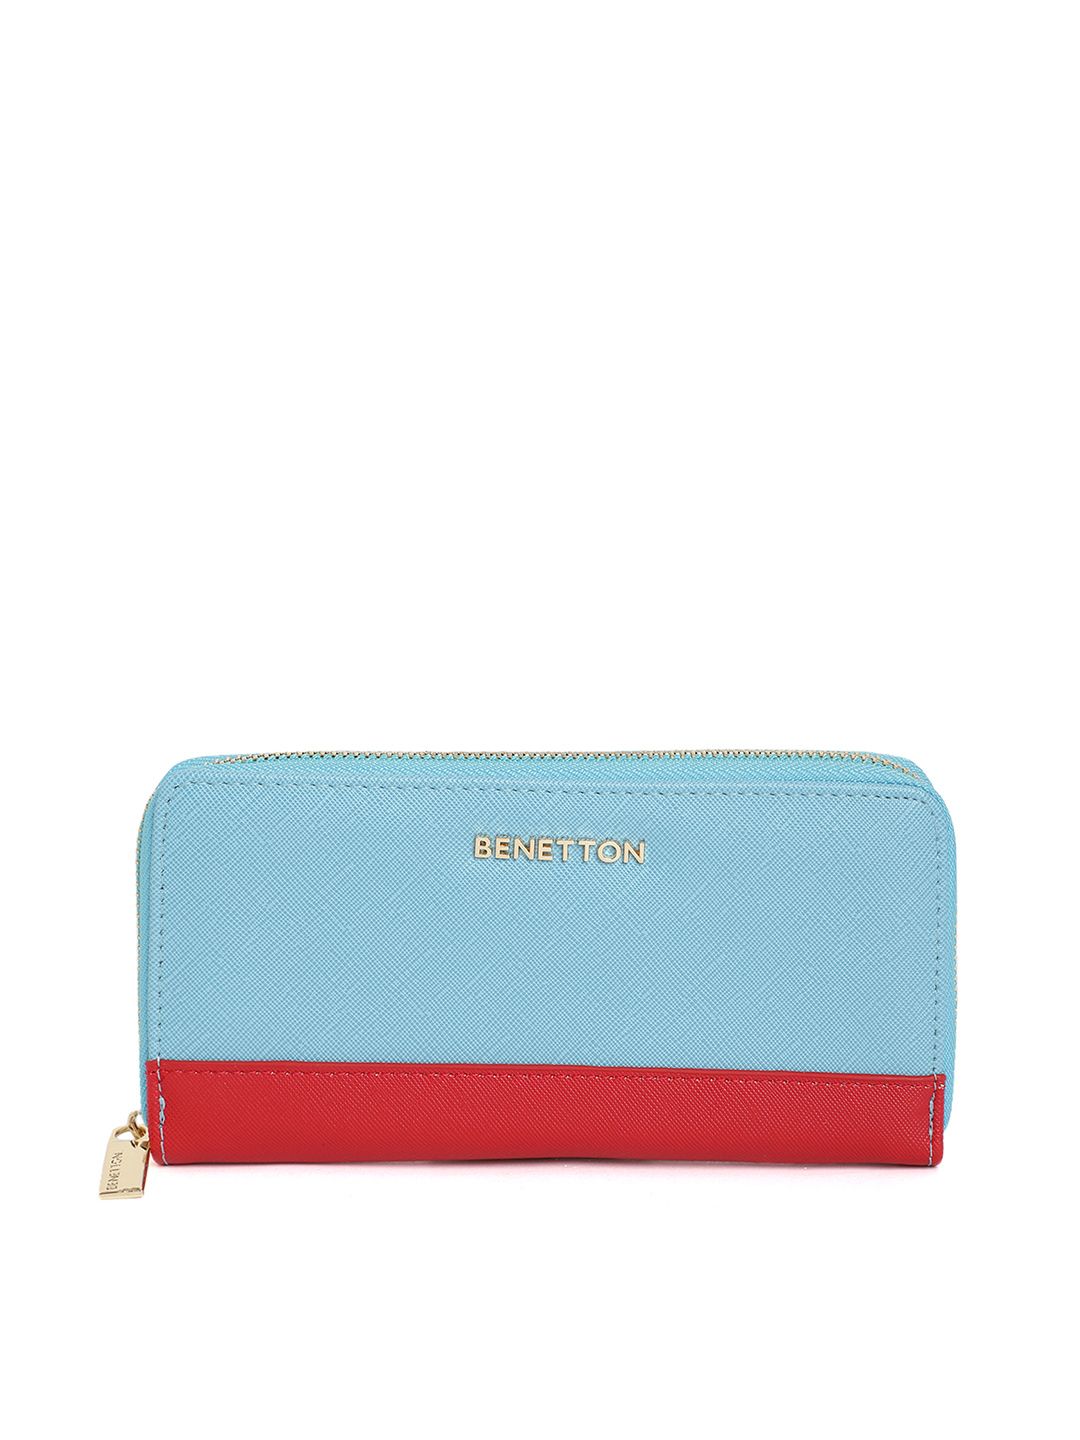 United Colors of Benetton Women Blue & Red Colourblocked Zip Around Wallet Price in India